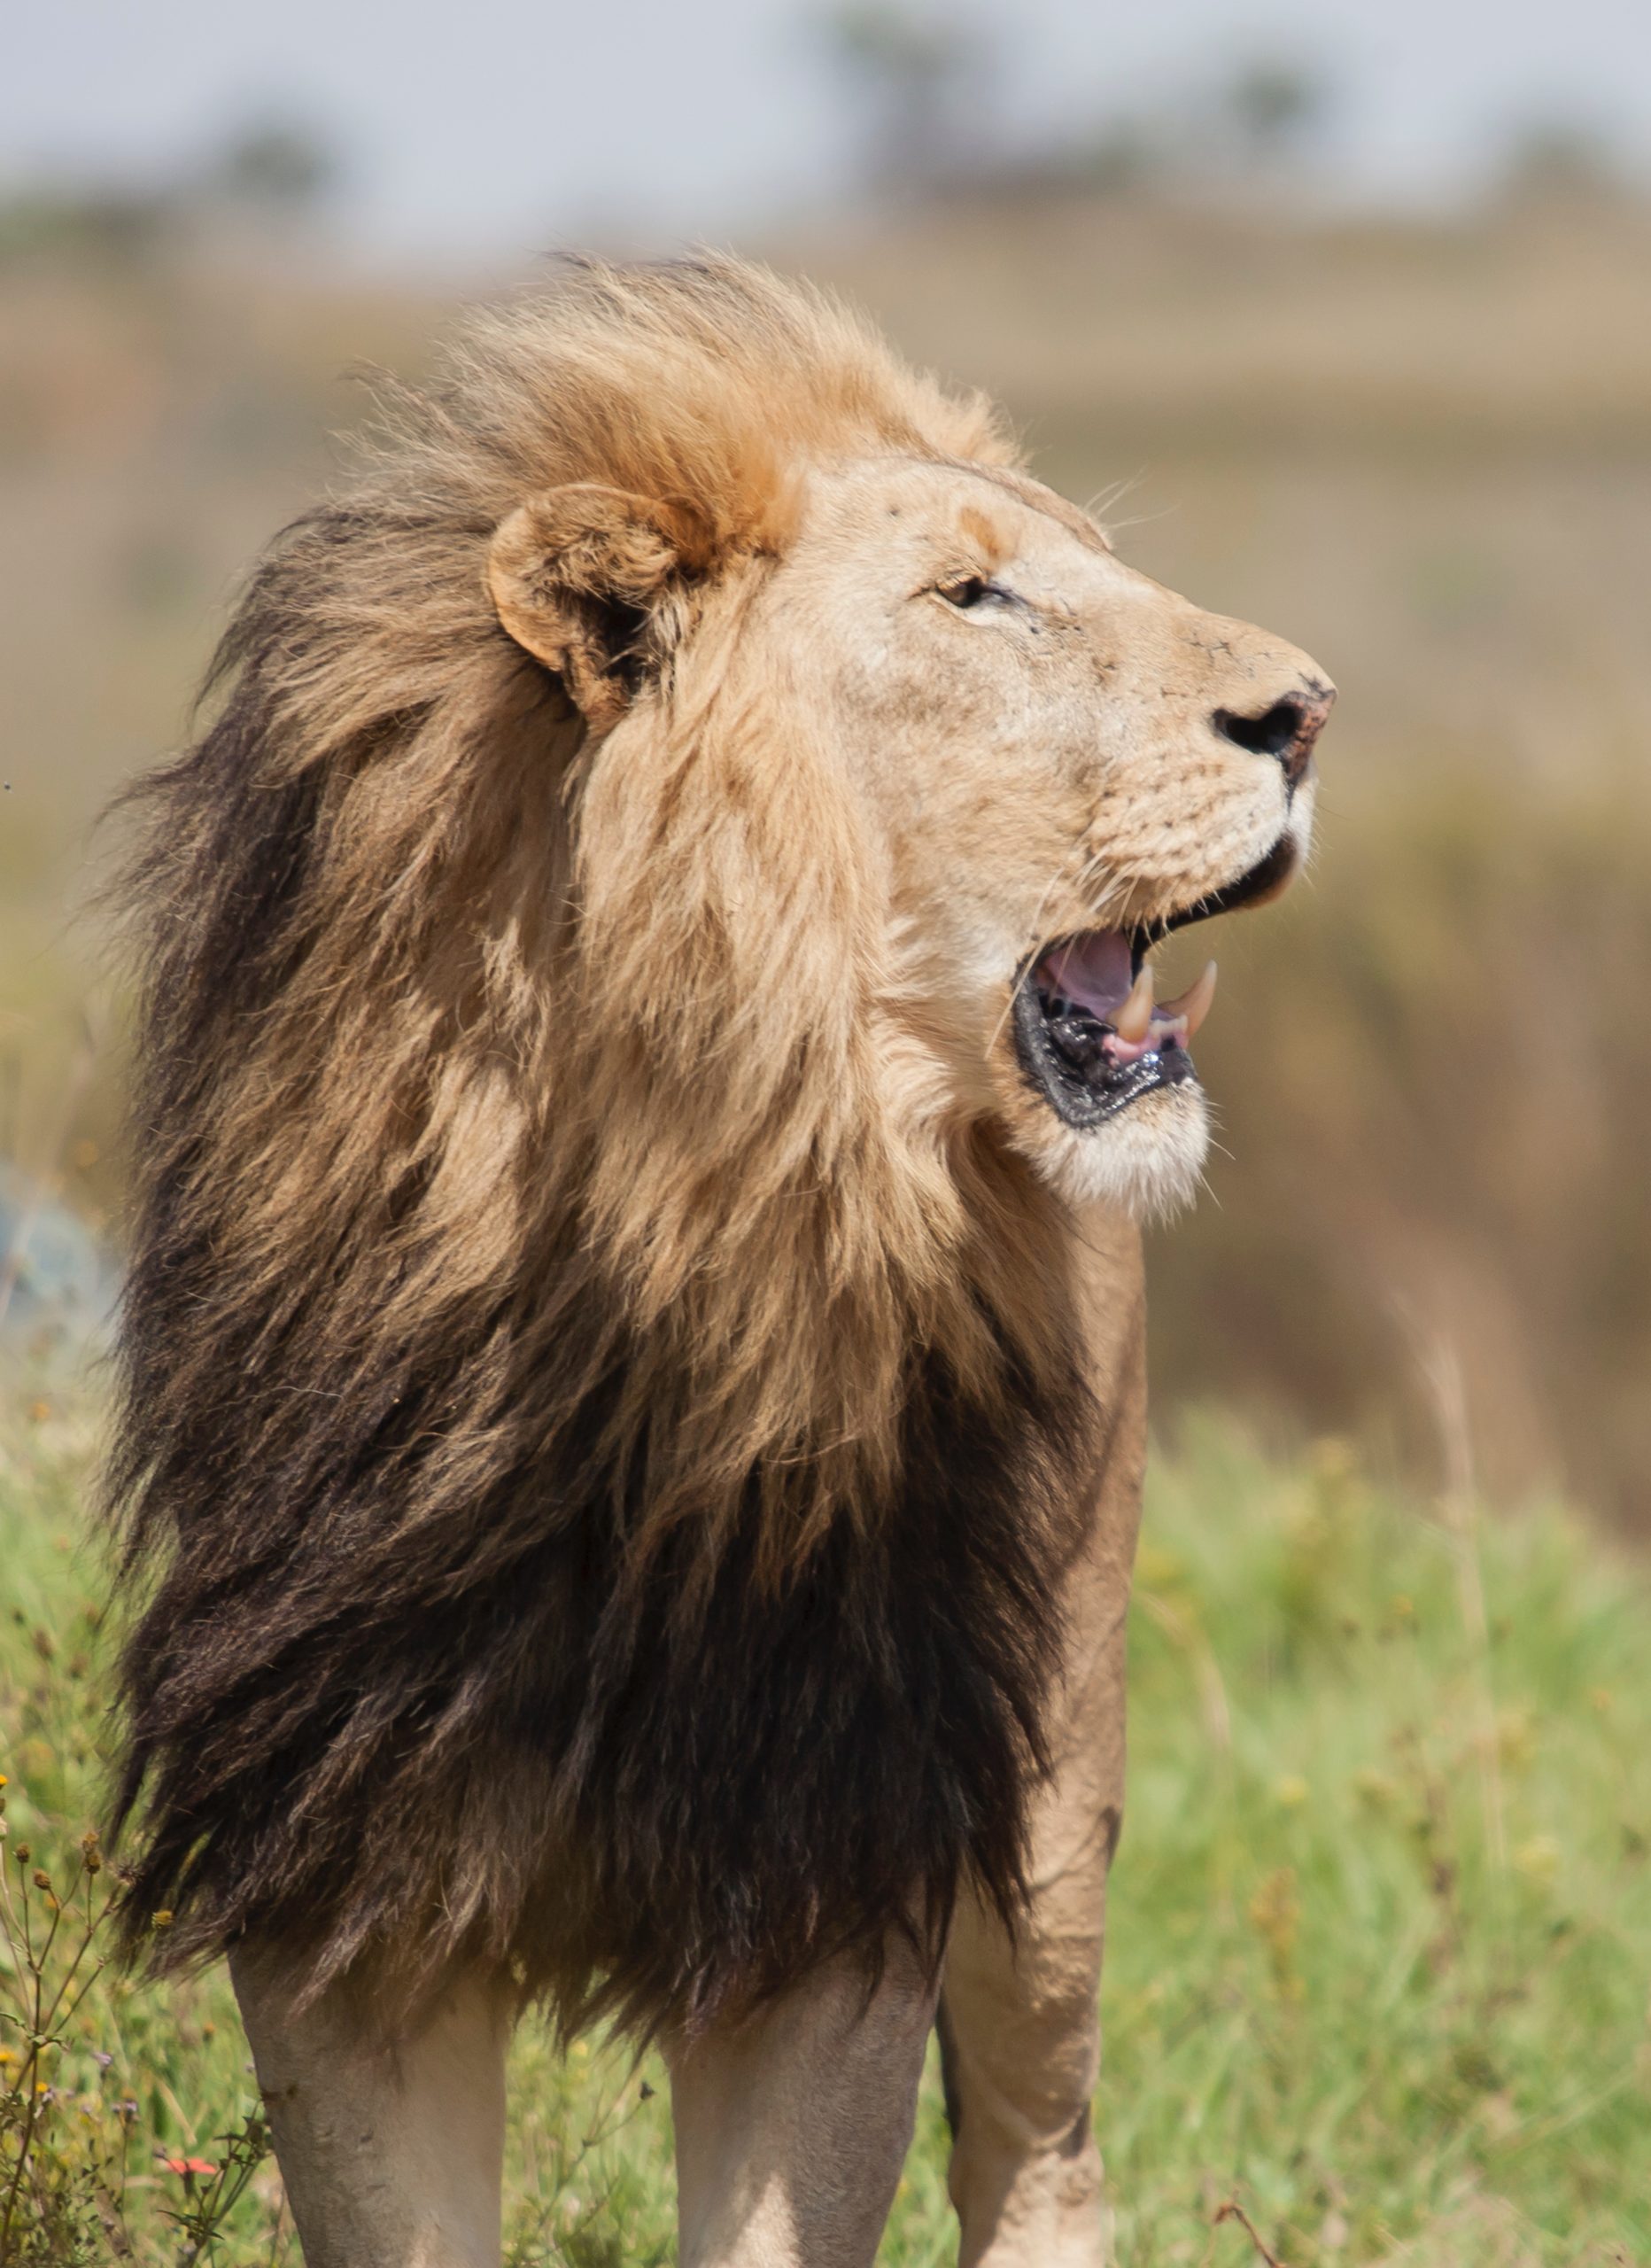 Lion with large mane stands up and looks to its left in South Africa's Kruger National Park